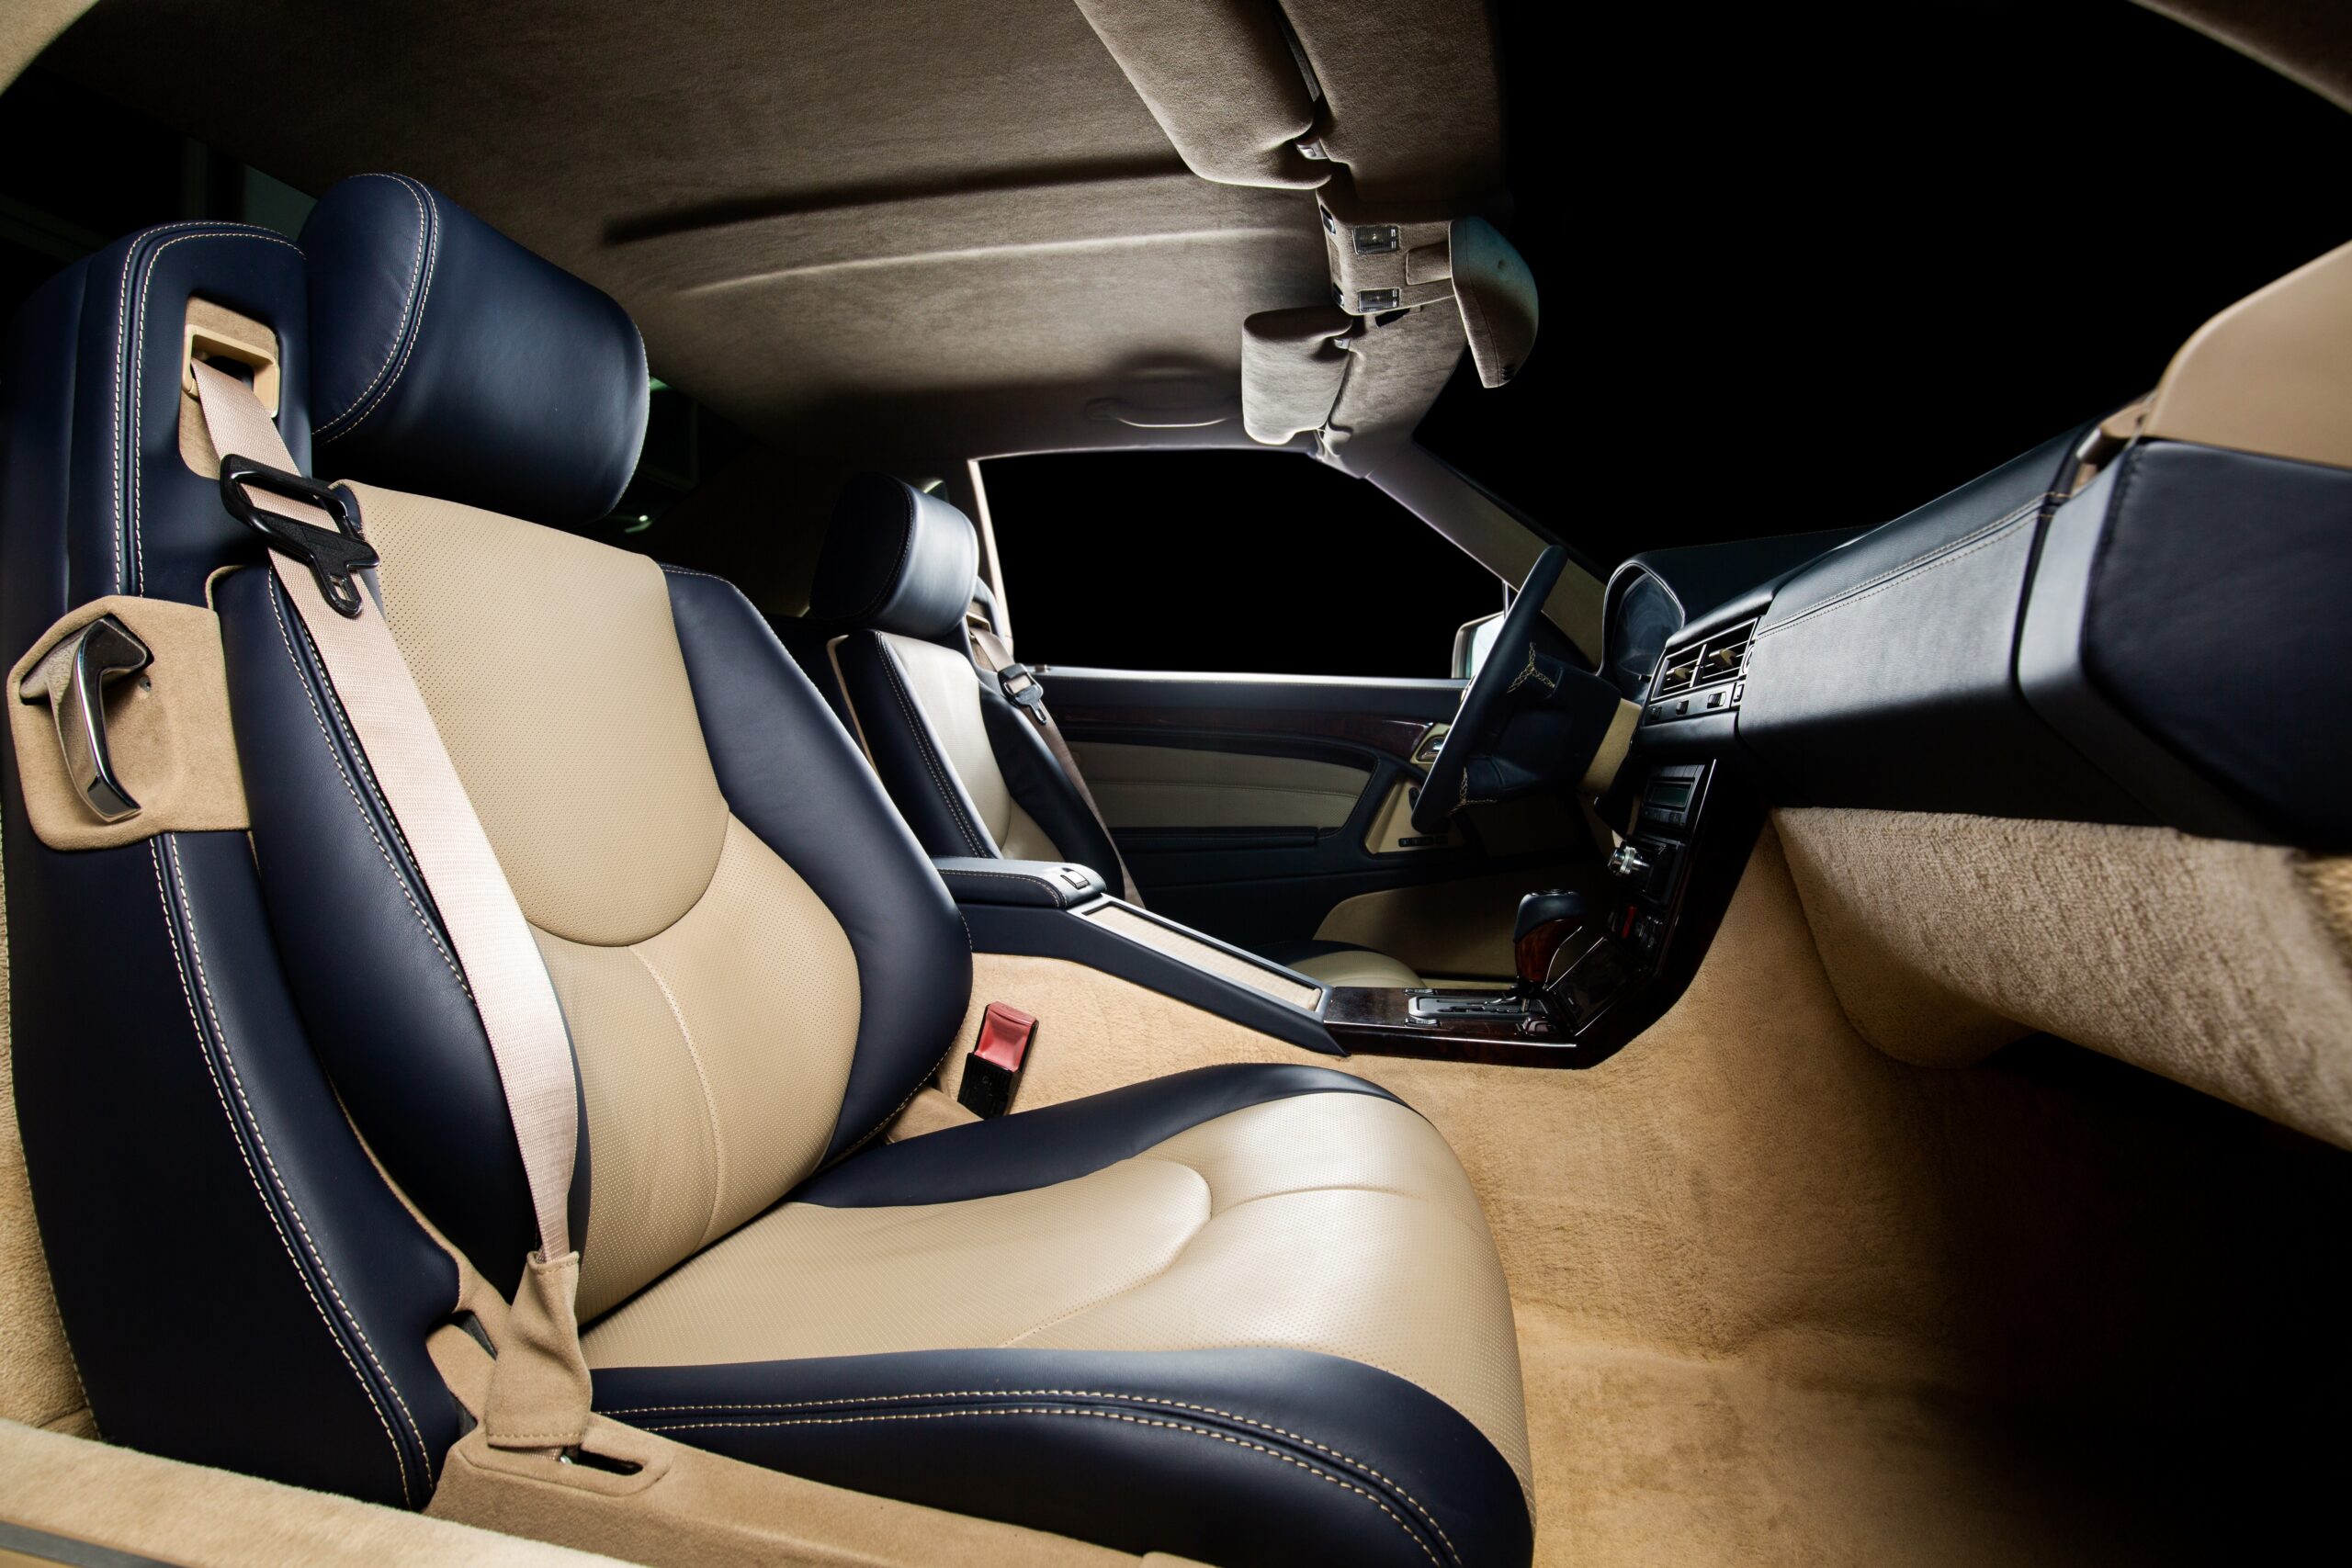 Ergonomic Design Principles For 4×4 Seat Covers: Comfort And Support